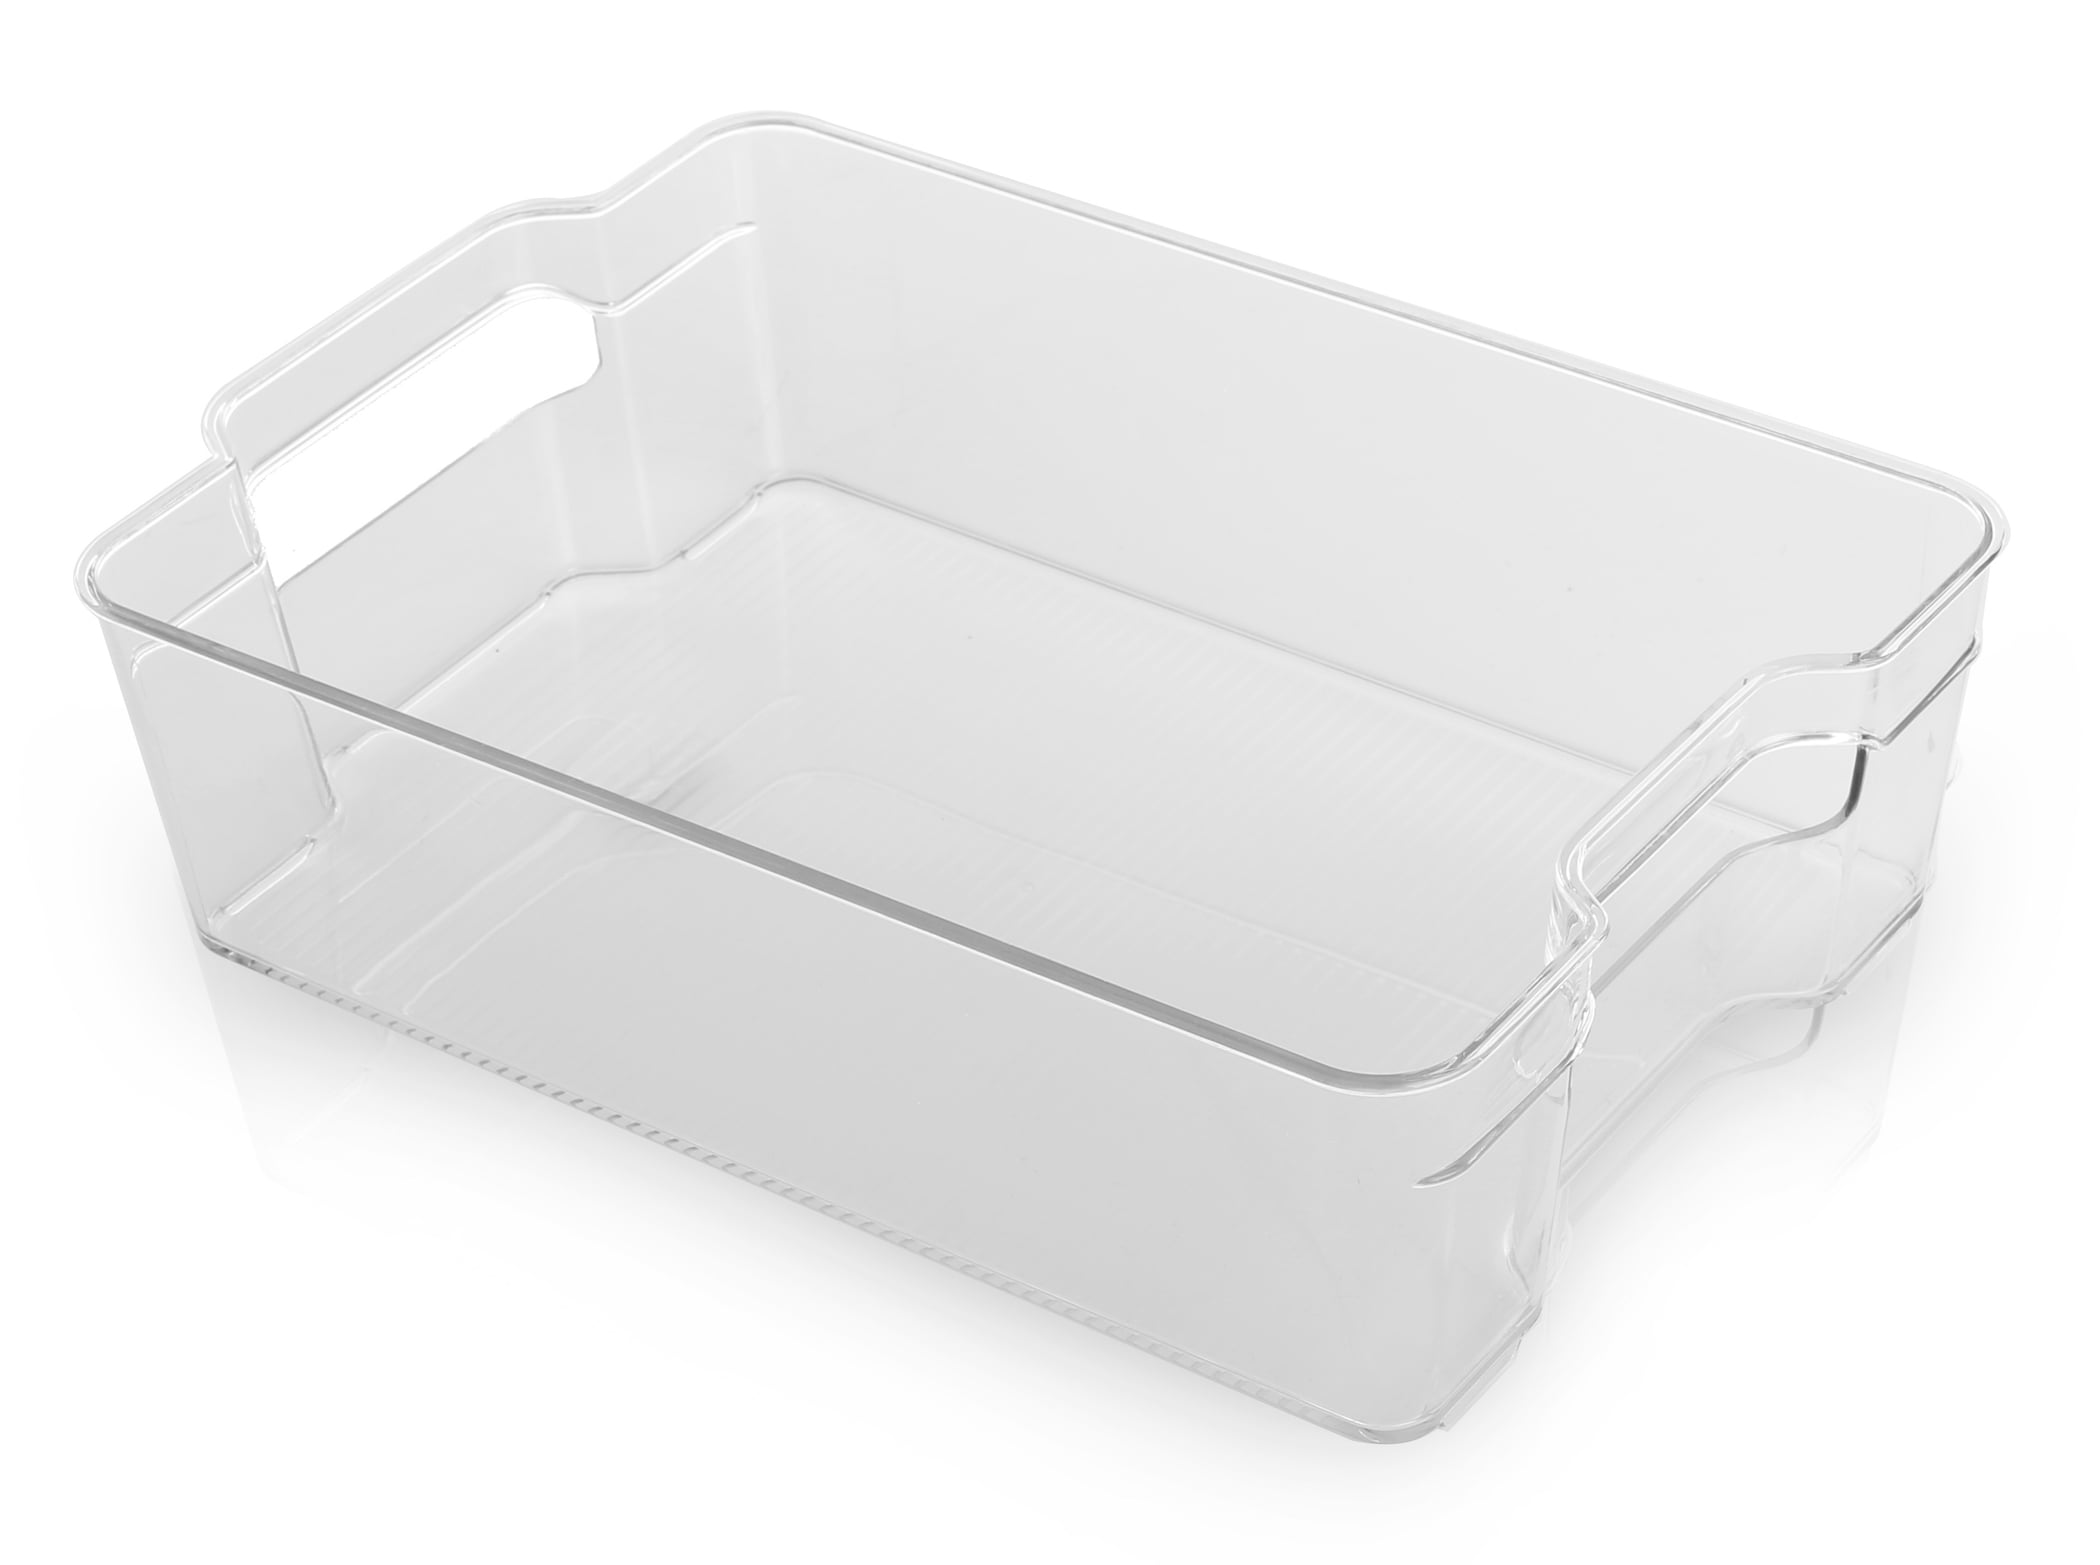 BINO | Stackable Storage Bins, Medium - 4 Pack | The Stacker Collection |  Clear Plastic Storage Bins | Organization and Storage Containers for Pantry